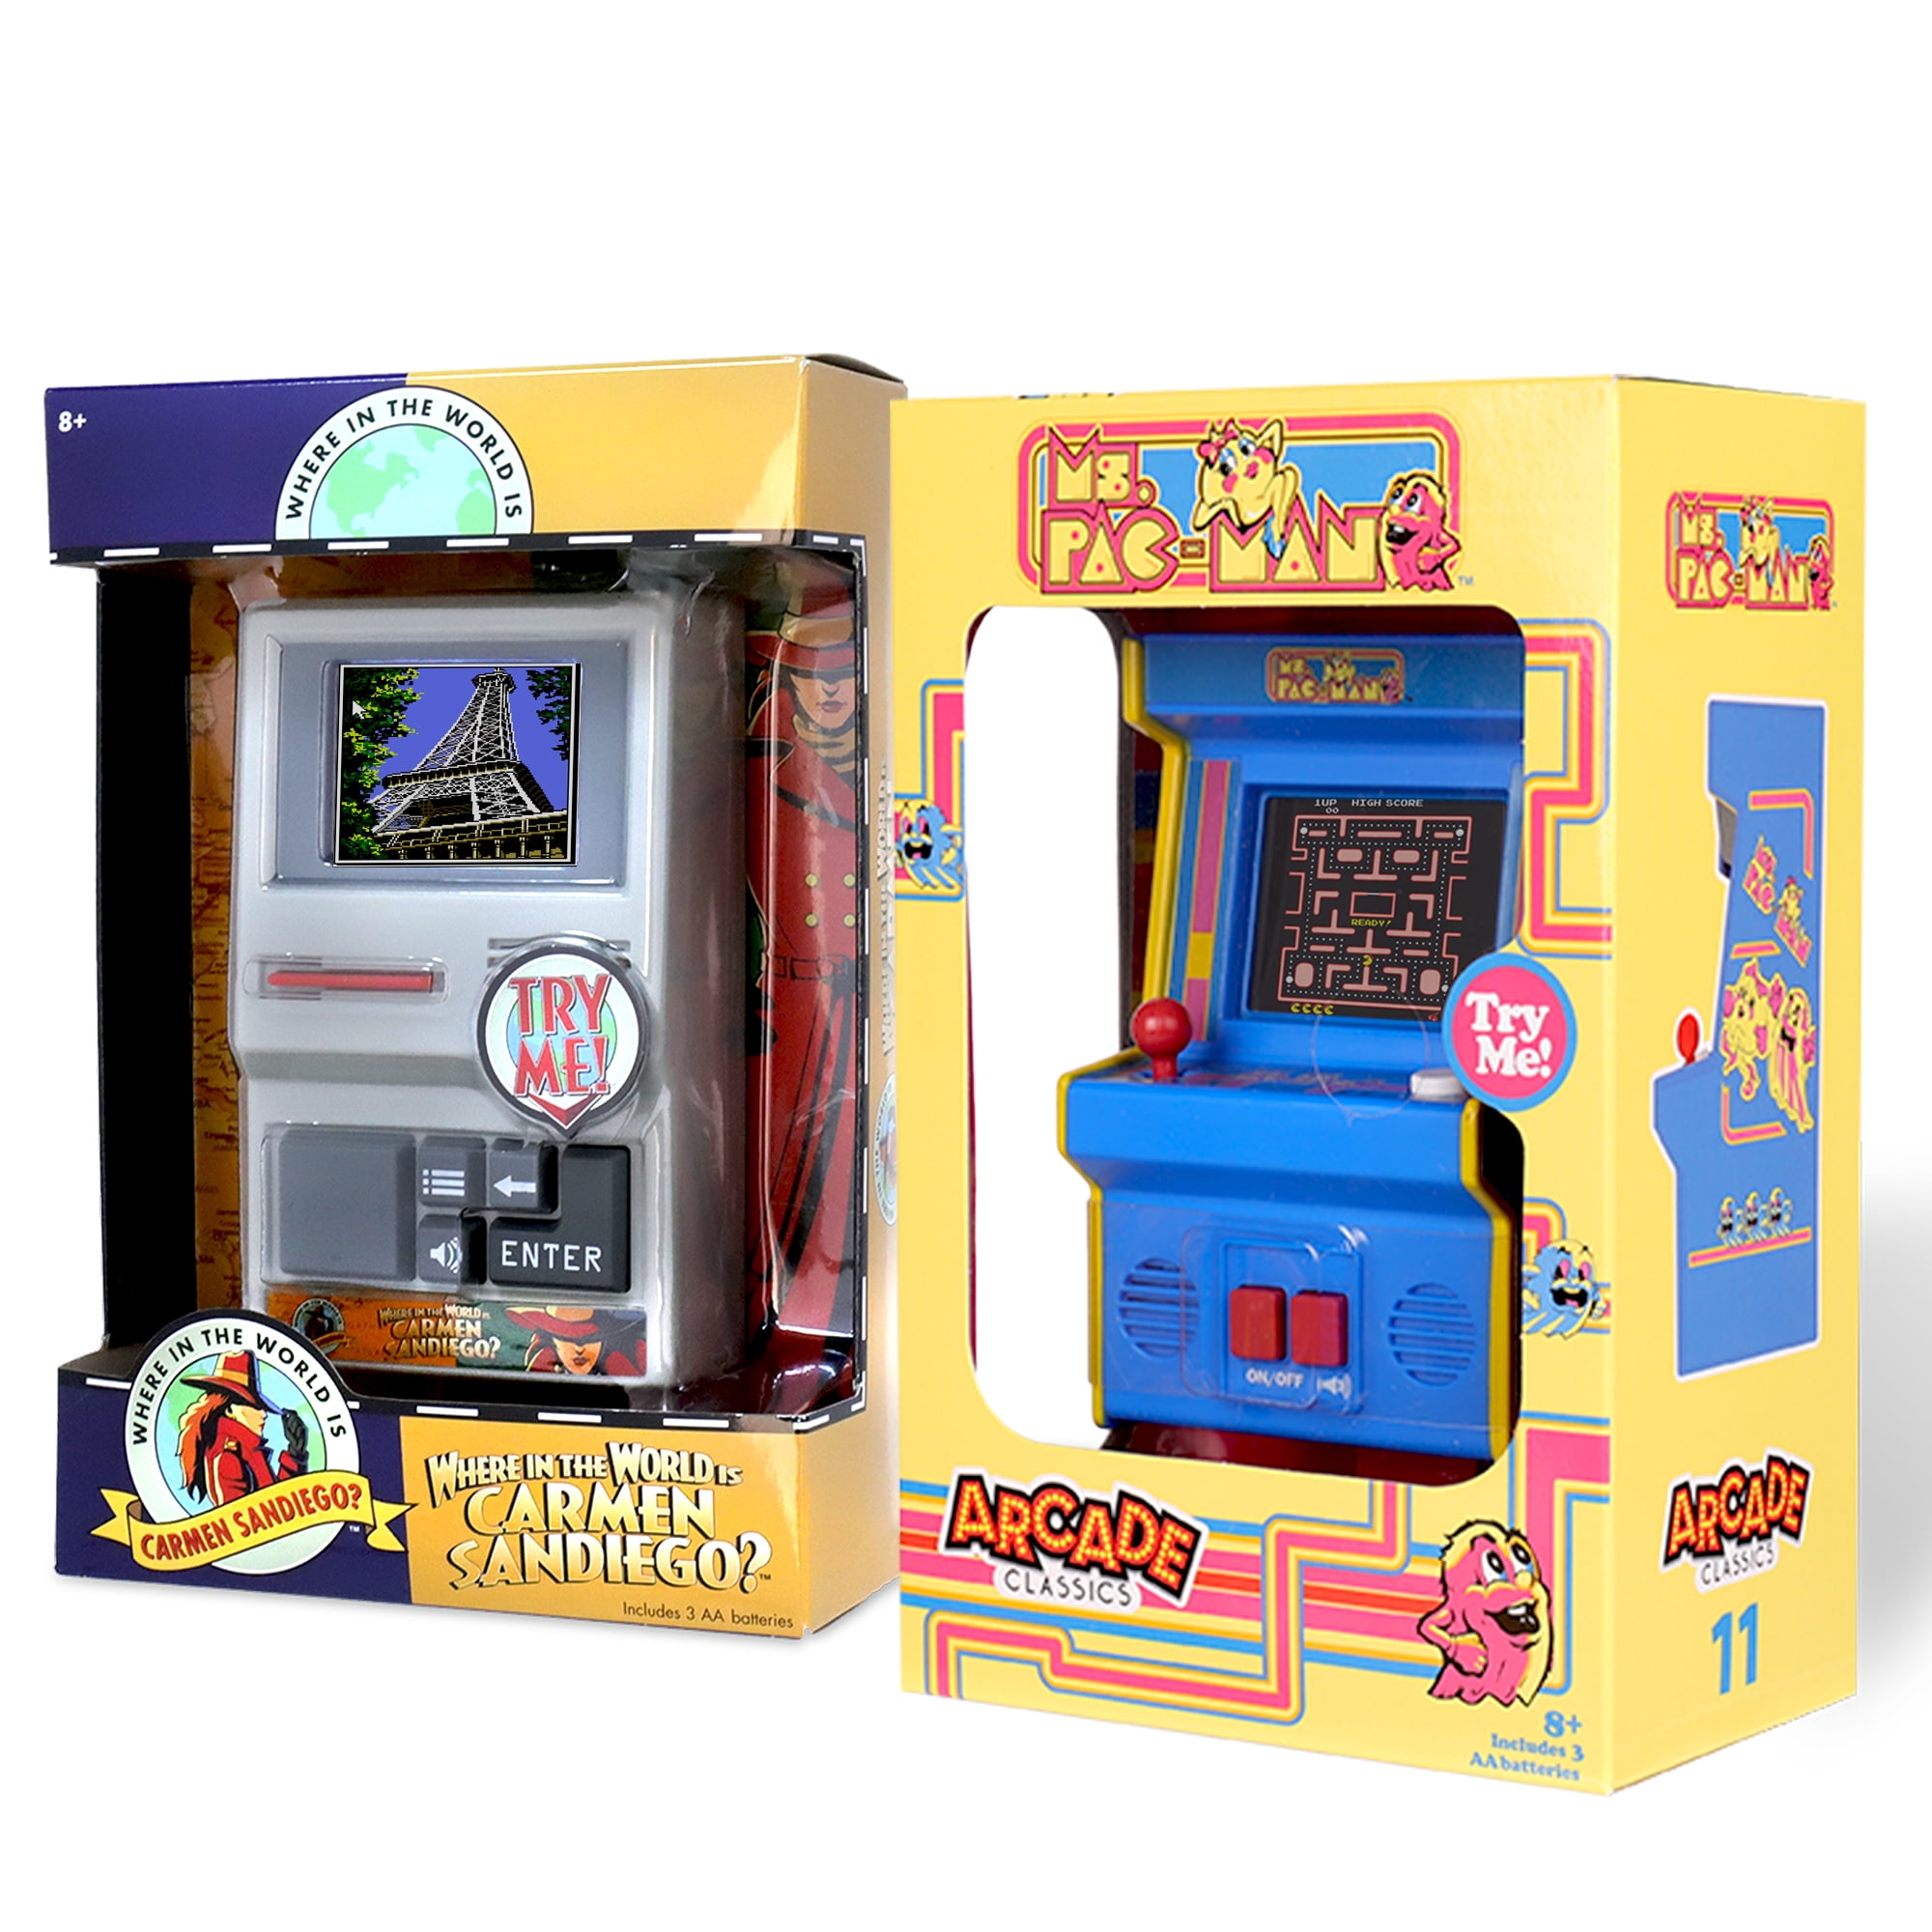 MICRO ARCADE PAC-MAN THE SMALLEST FULLY FUNCTIONAL POCKET SIZED ARCADE GAME 